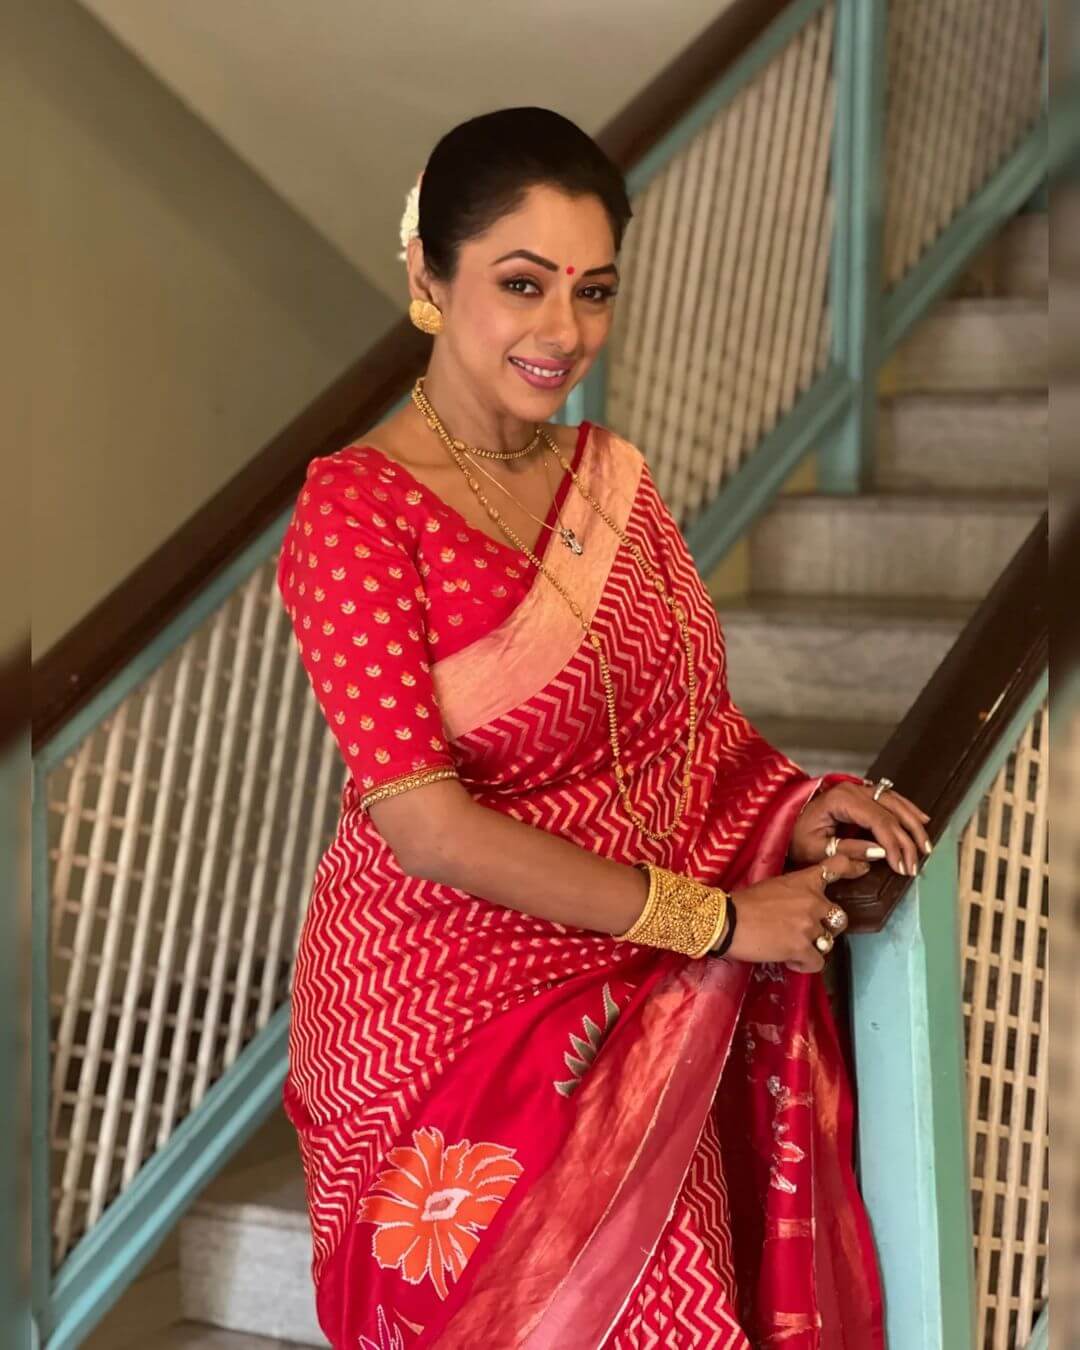 Rupali Ganguly Seen Posing In A Floral Print Pink Saree With Golden Jewellery And Gajra On Her Hair